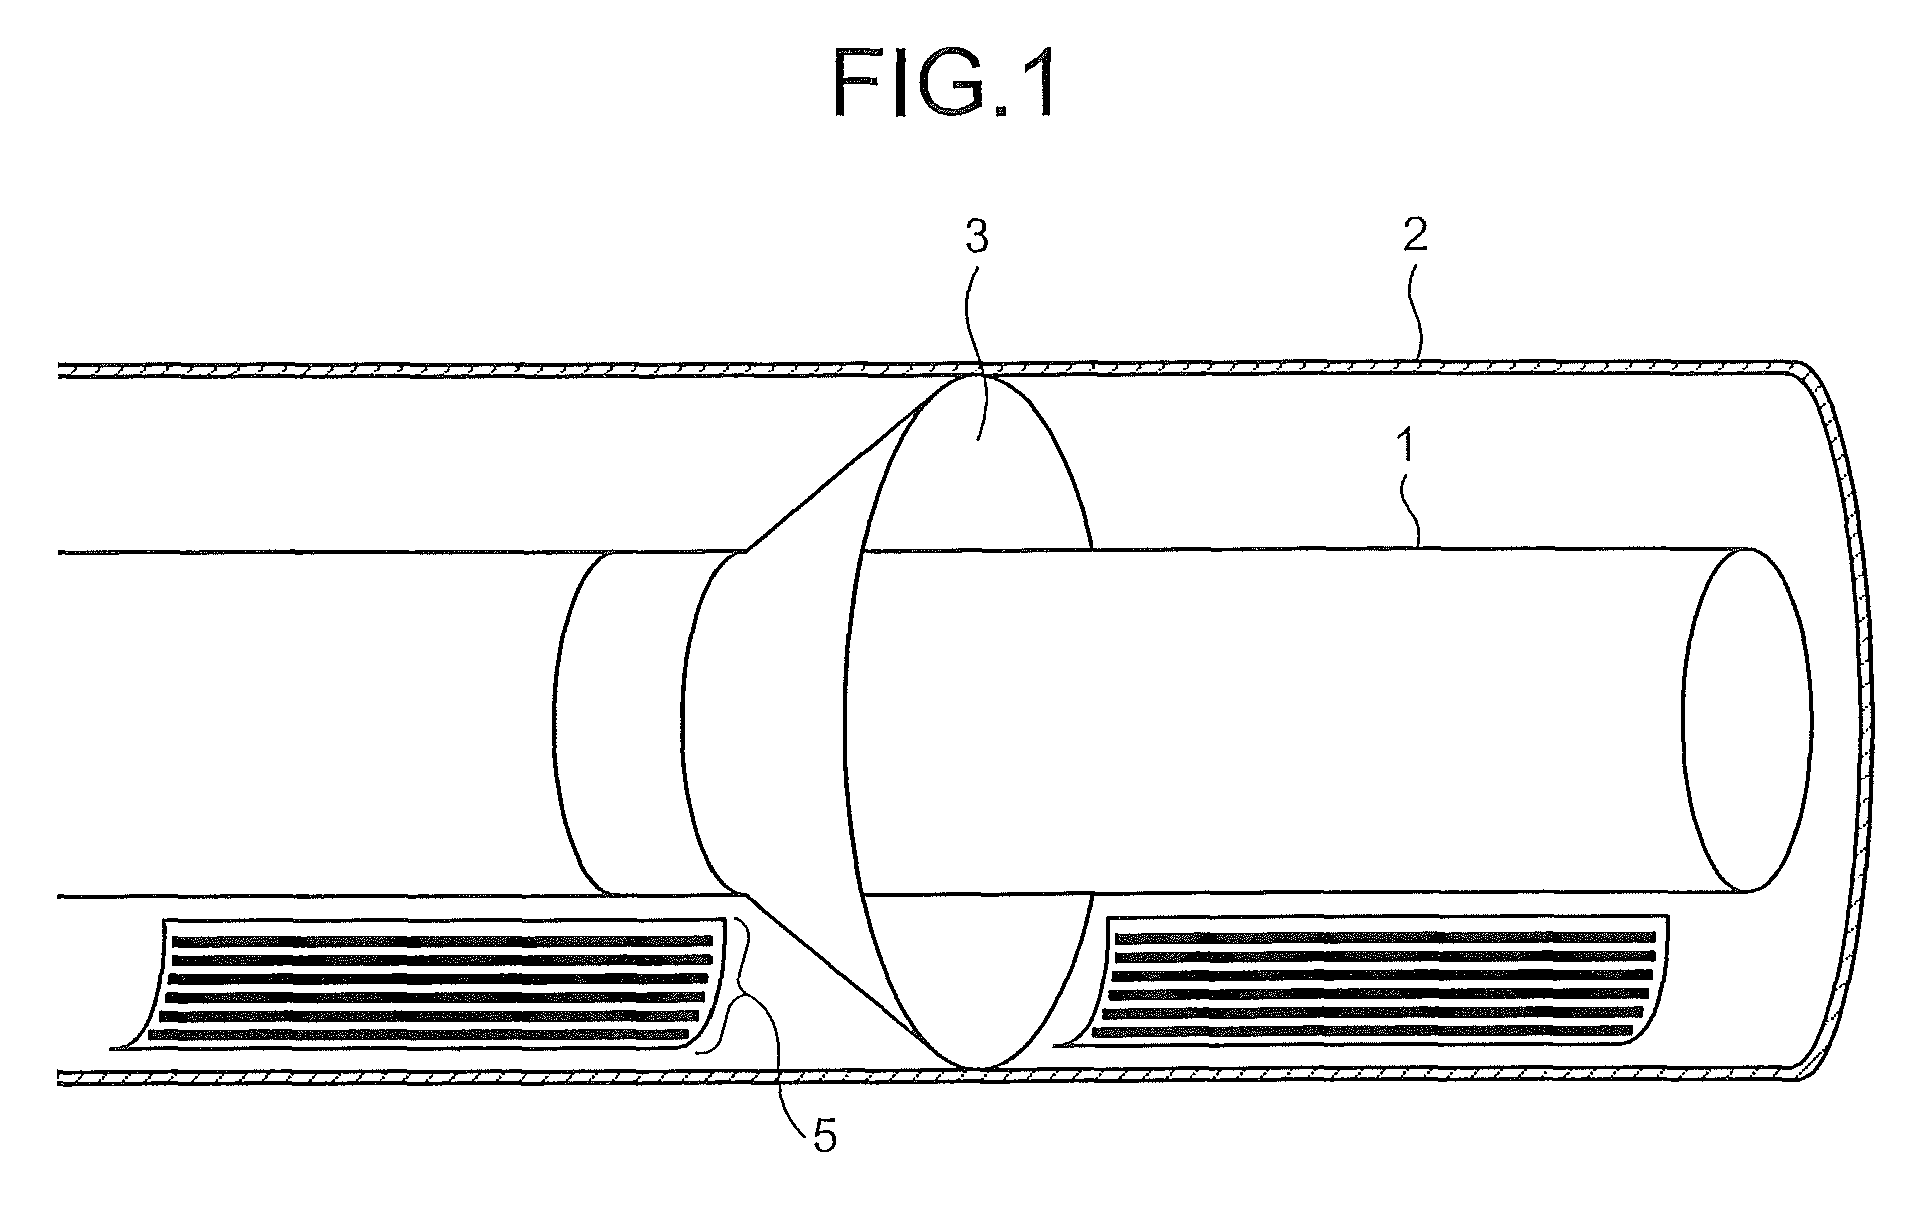 Fluid-insulated electrical apparatus